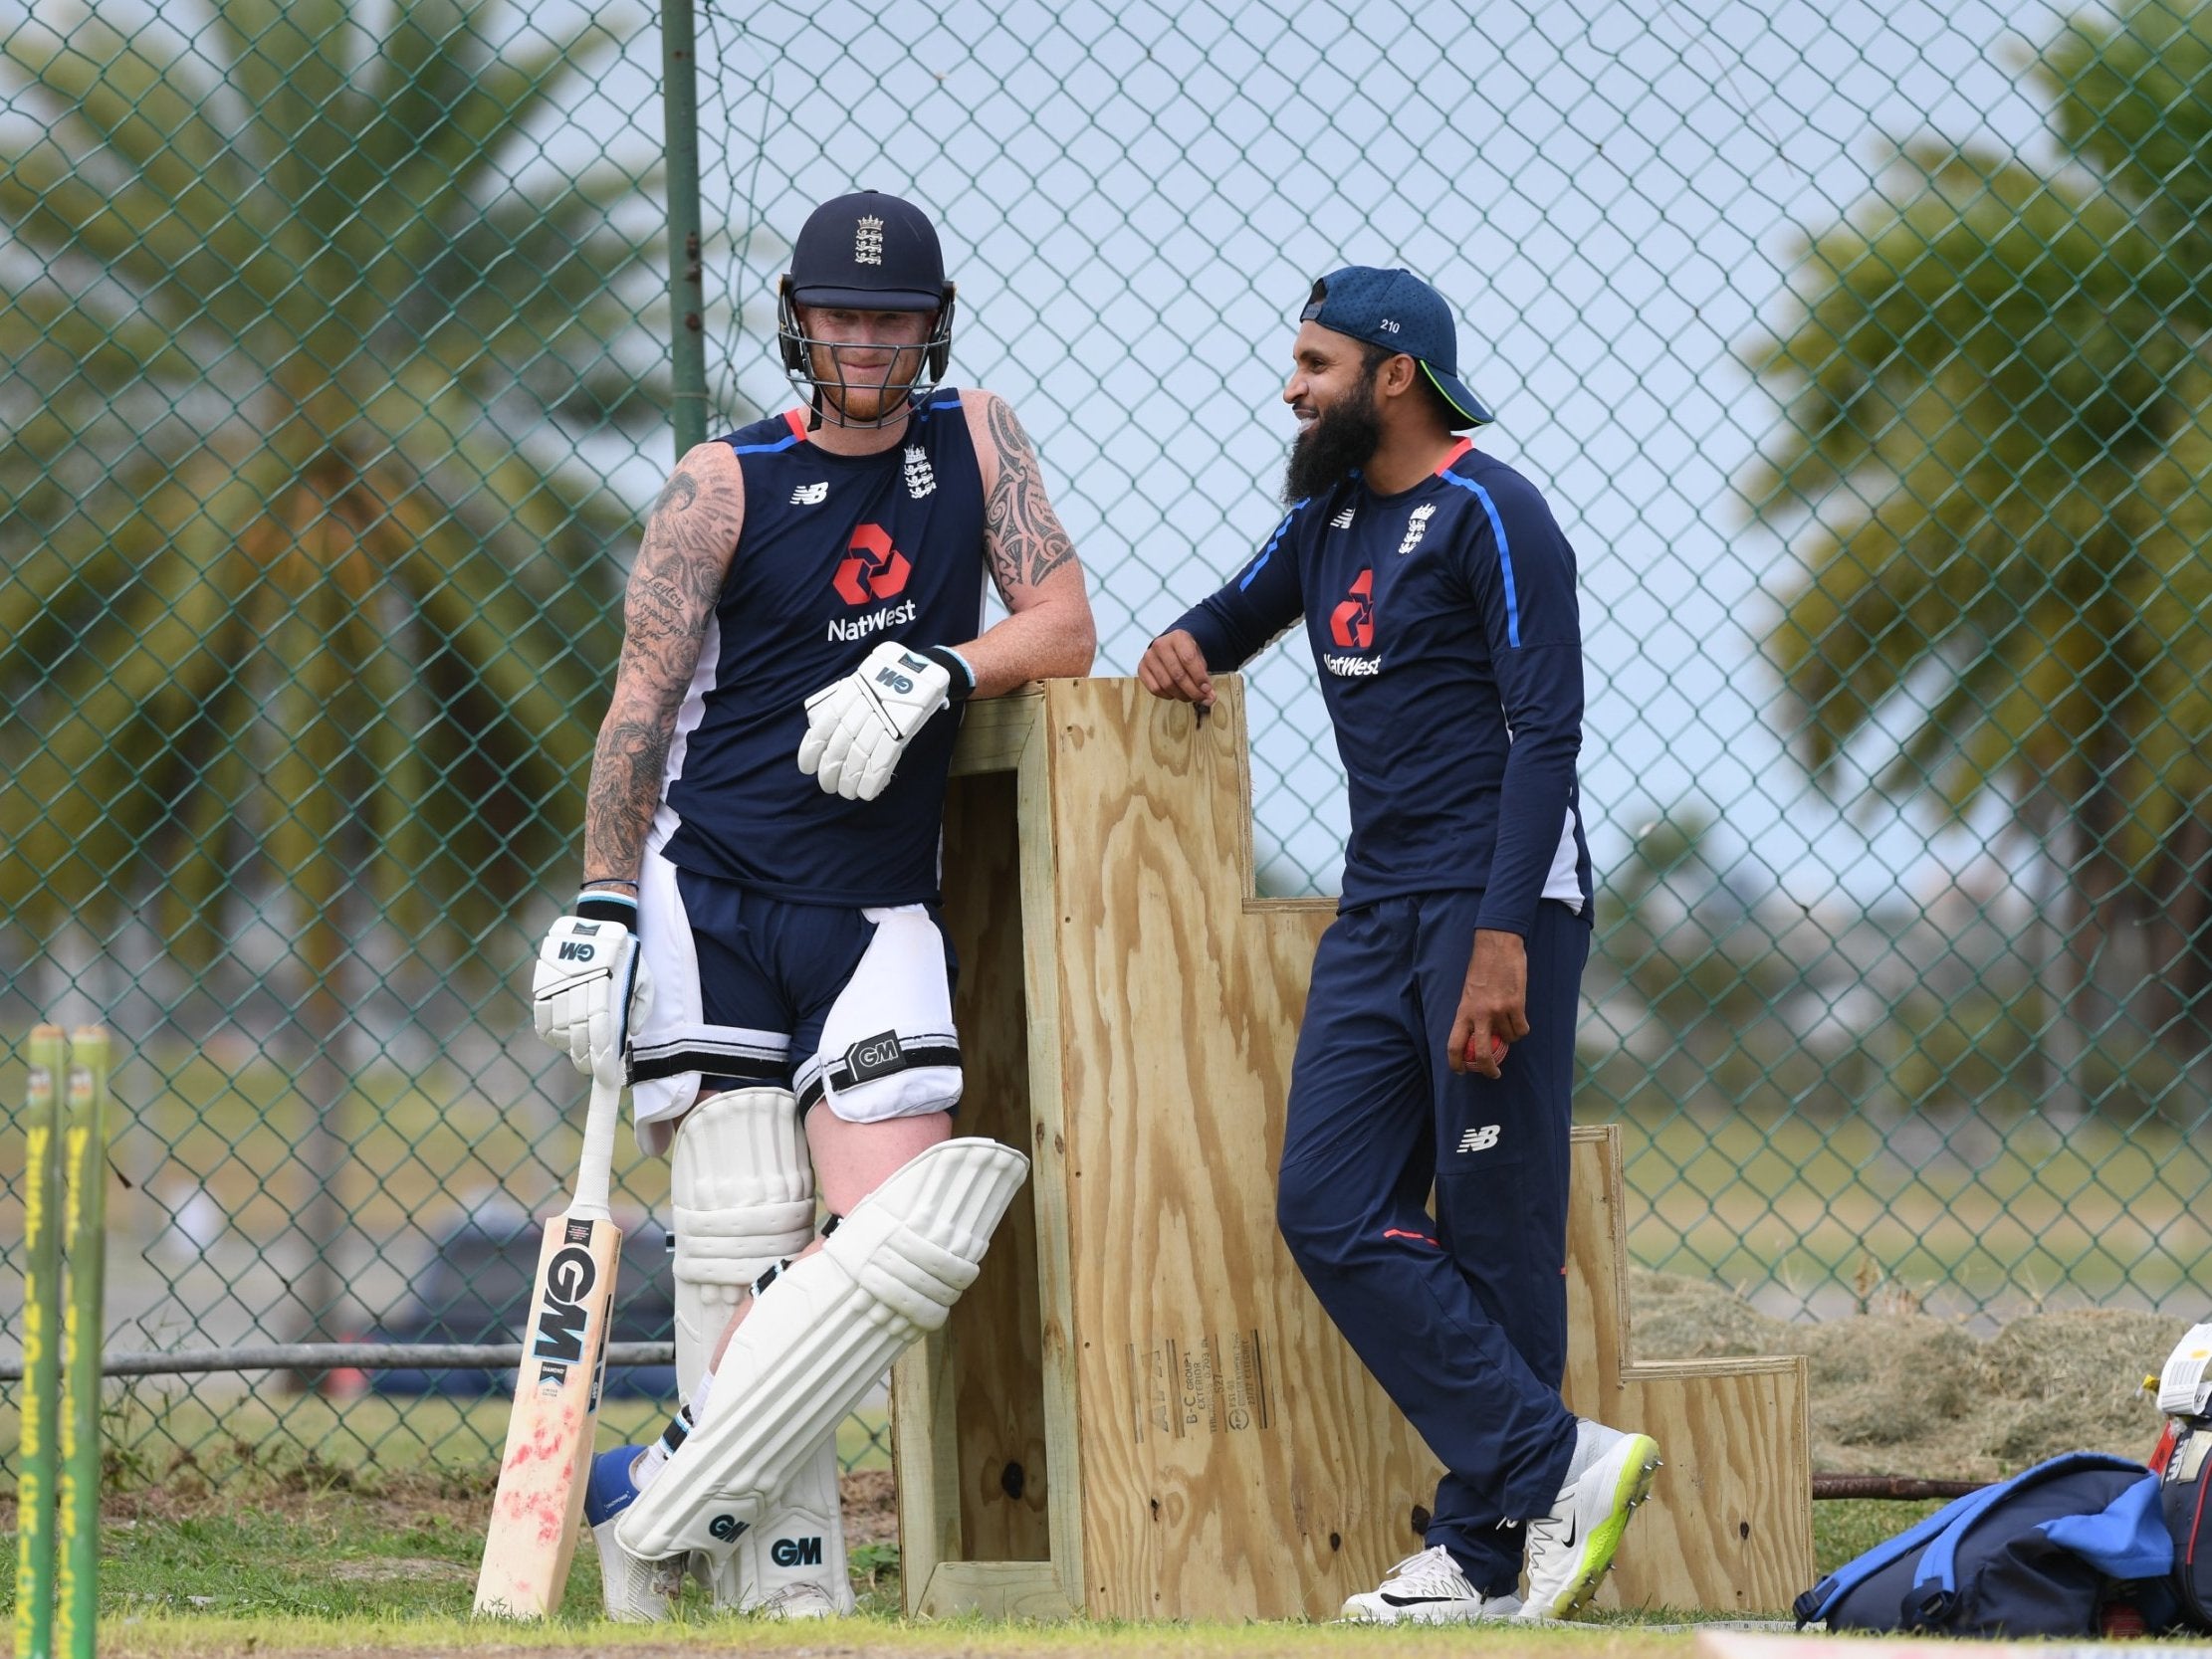 Ben Stokes with Adil Rashid during net practice on Tuesday